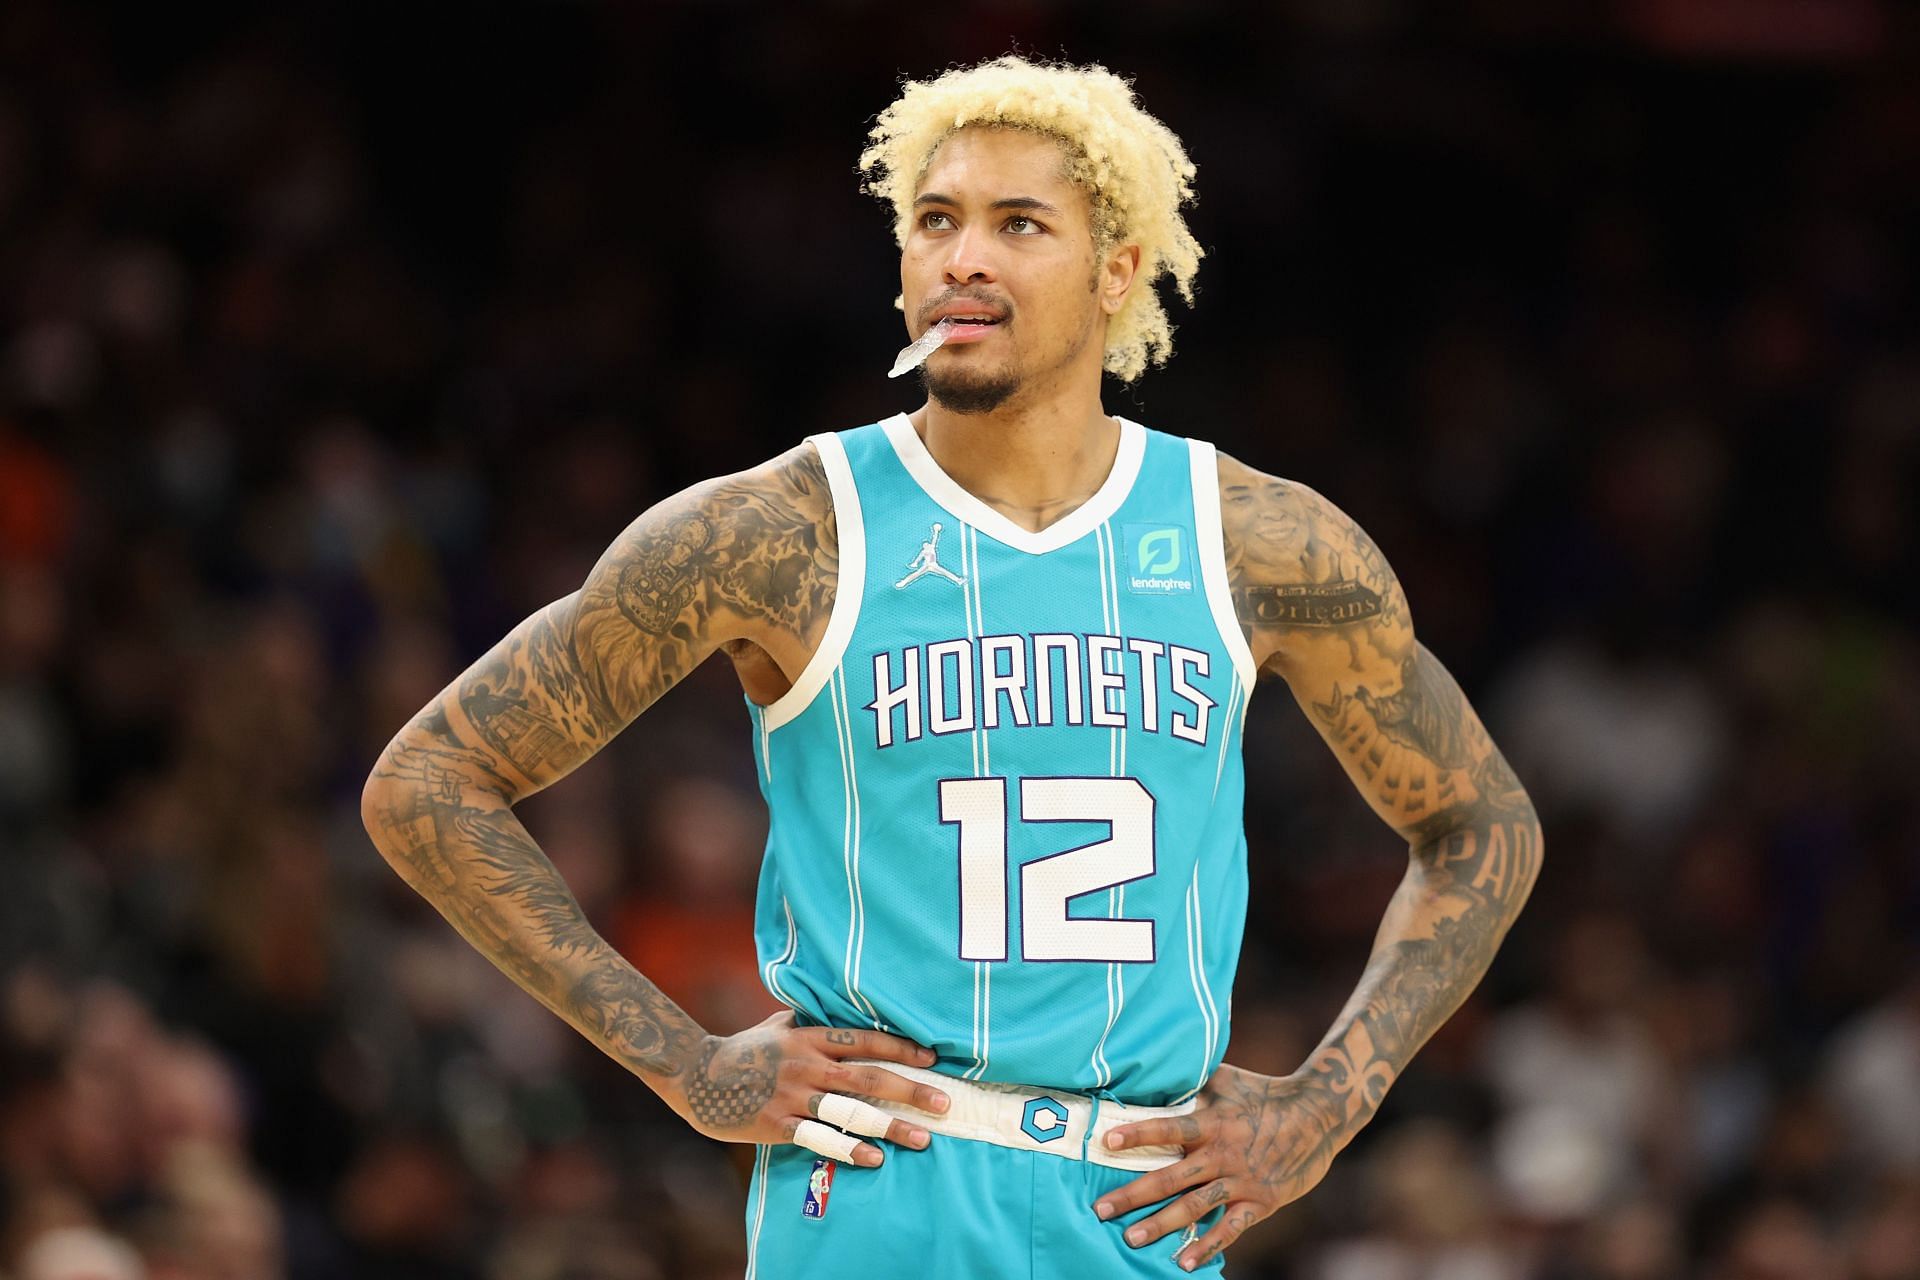 Charlotte Hornets player Kelly Oubre Jr.